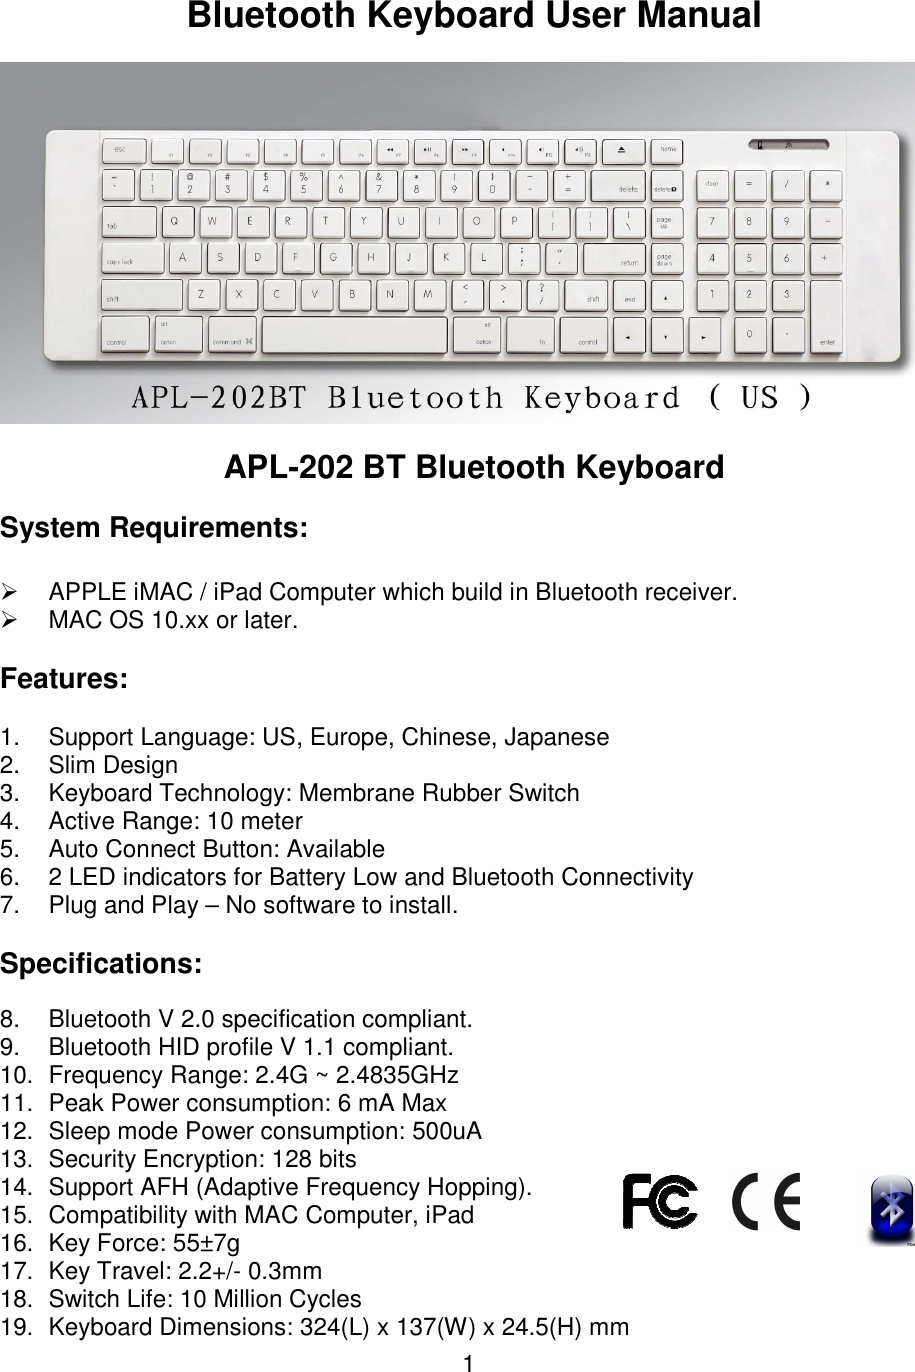  1 Bluetooth Keyboard User Manual   APL-202 BT Bluetooth Keyboard System Requirements:   APPLE iMAC / iPad Computer which build in Bluetooth receiver.   MAC OS 10.xx or later. Features: 1.  Support Language: US, Europe, Chinese, Japanese 2.  Slim Design 3.  Keyboard Technology: Membrane Rubber Switch 4.  Active Range: 10 meter 5.  Auto Connect Button: Available  6.  2 LED indicators for Battery Low and Bluetooth Connectivity  7.  Plug and Play – No software to install.  Specifications: 8.  Bluetooth V 2.0 specification compliant. 9.  Bluetooth HID profile V 1.1 compliant. 10.  Frequency Range: 2.4G ~ 2.4835GHz 11.  Peak Power consumption: 6 mA Max 12.  Sleep mode Power consumption: 500uA 13.  Security Encryption: 128 bits  14.  Support AFH (Adaptive Frequency Hopping). 15.  Compatibility with MAC Computer, iPad 16.  Key Force: 55±7g  17.  Key Travel: 2.2+/- 0.3mm  18.  Switch Life: 10 Million Cycles  19.  Keyboard Dimensions: 324(L) x 137(W) x 24.5(H) mm  